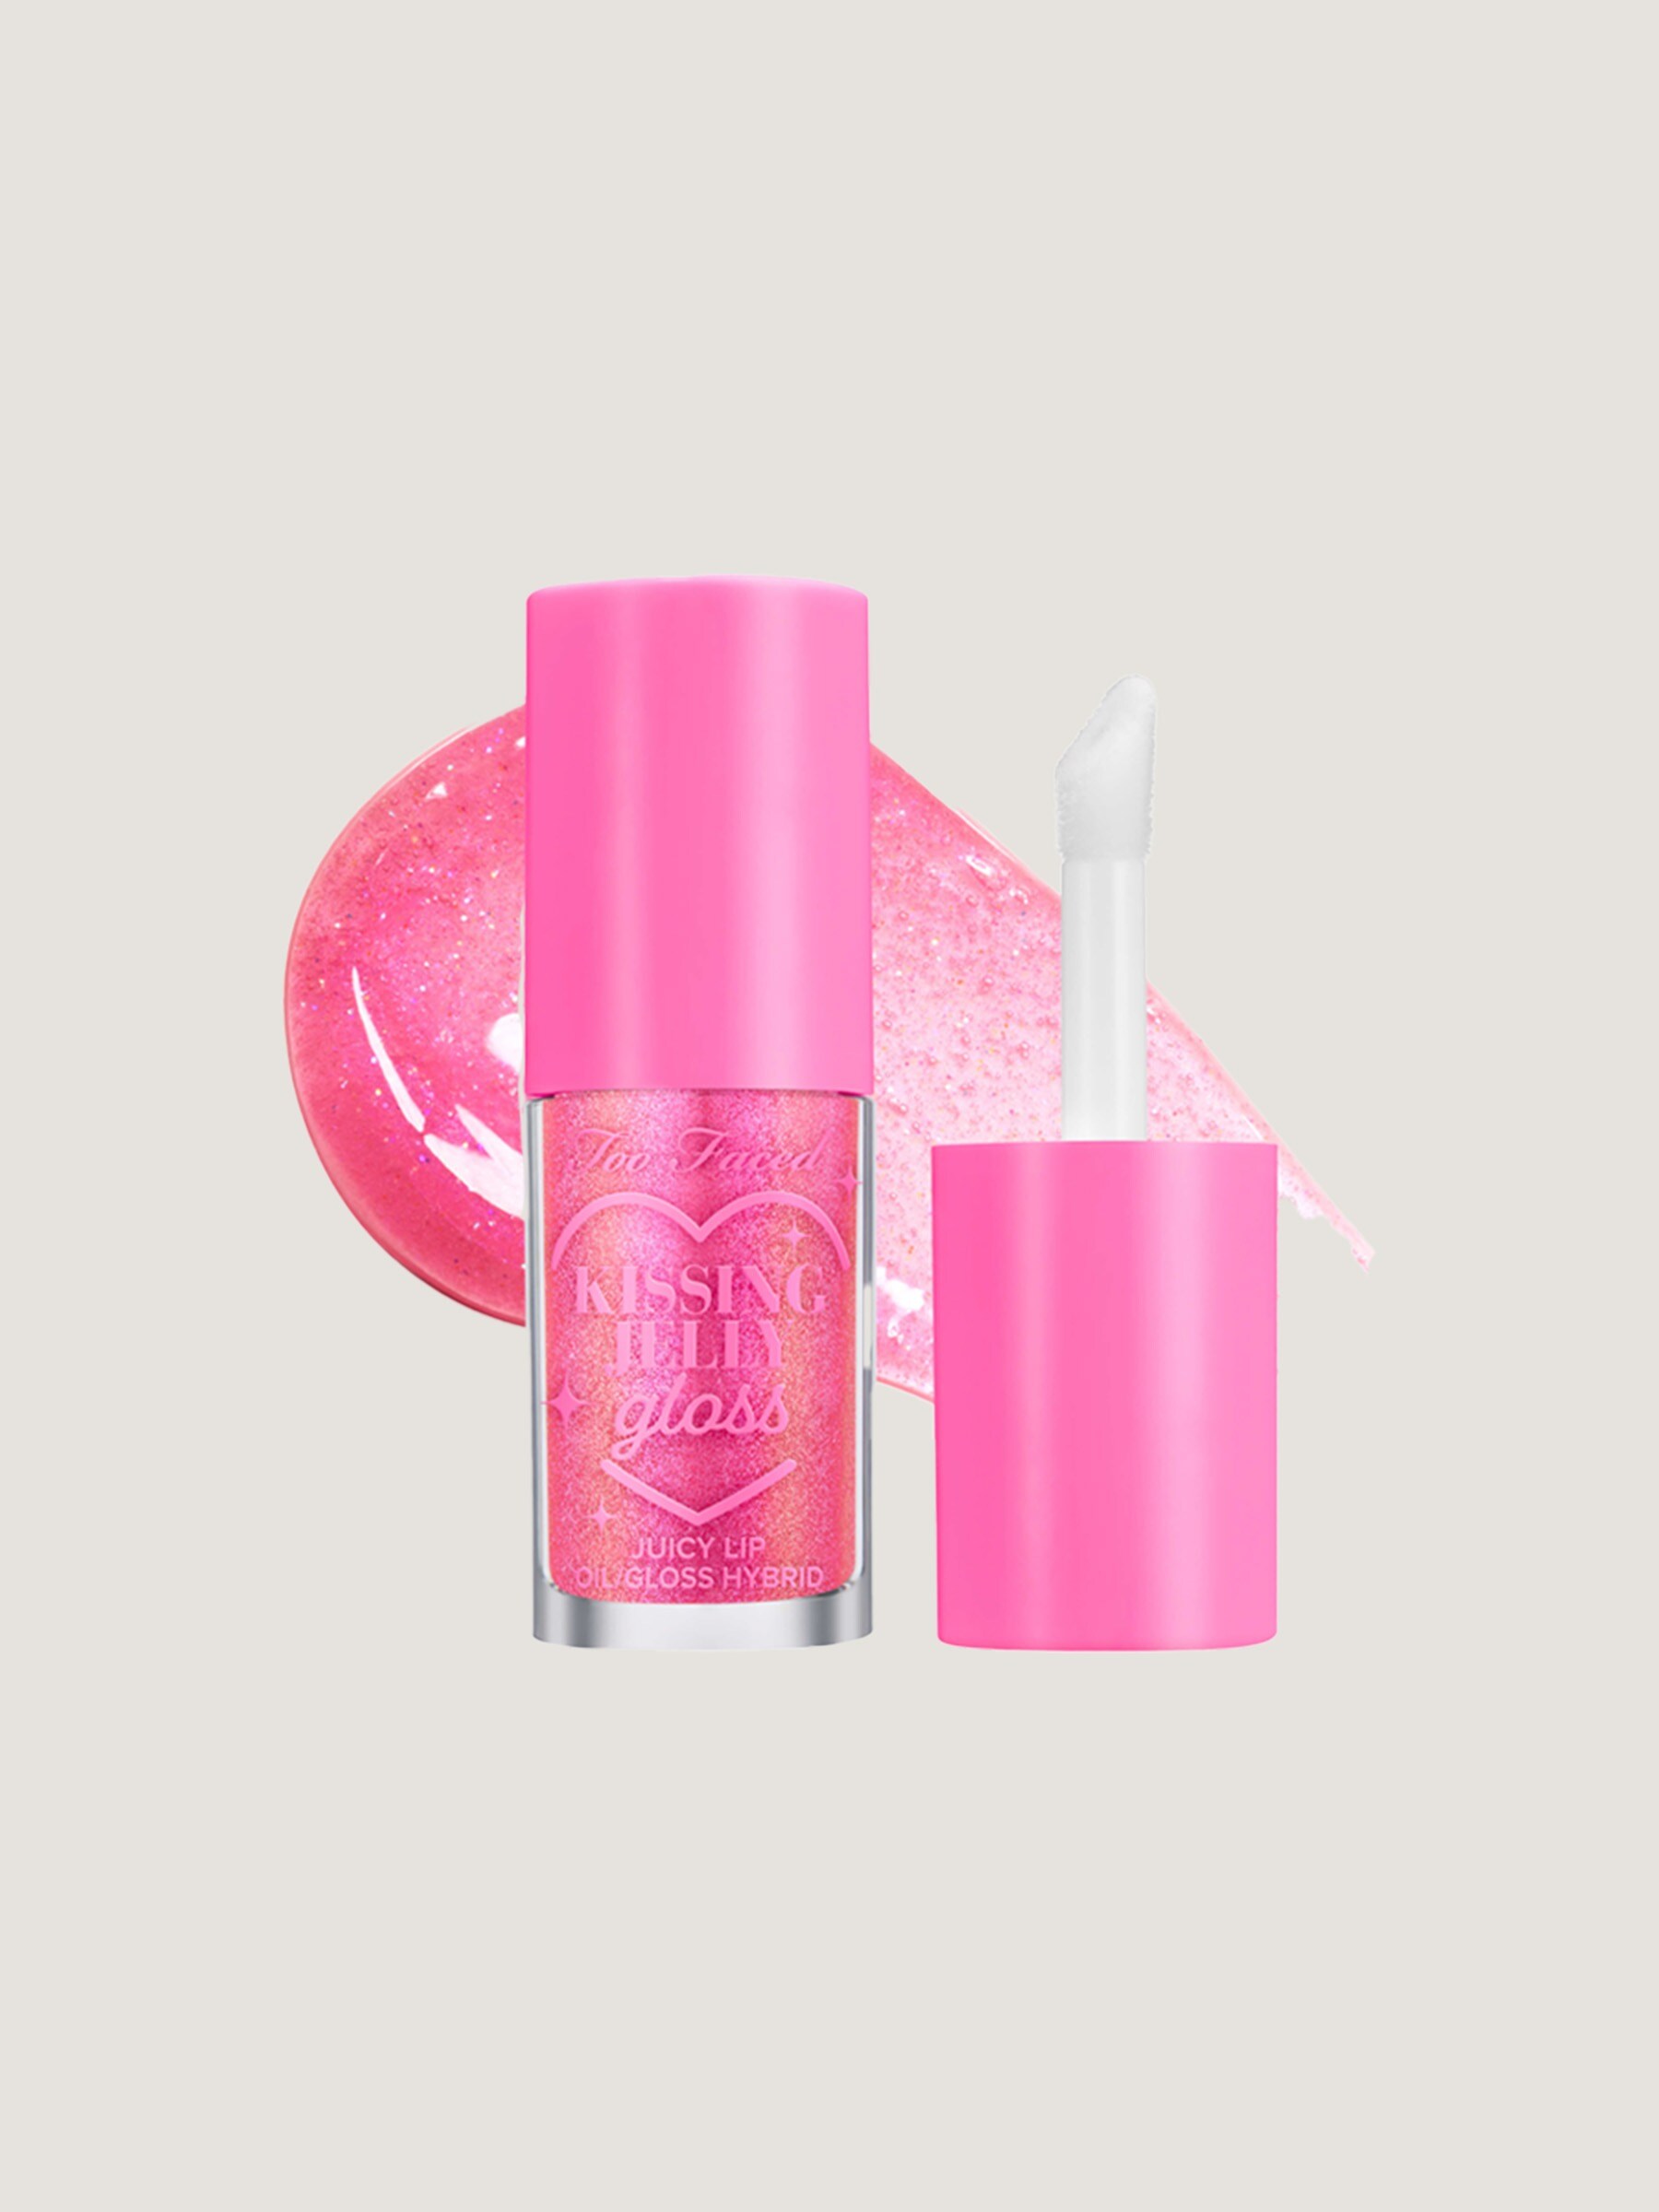 Too Faced Kissing Jelly Lip Oil Gloss@2x